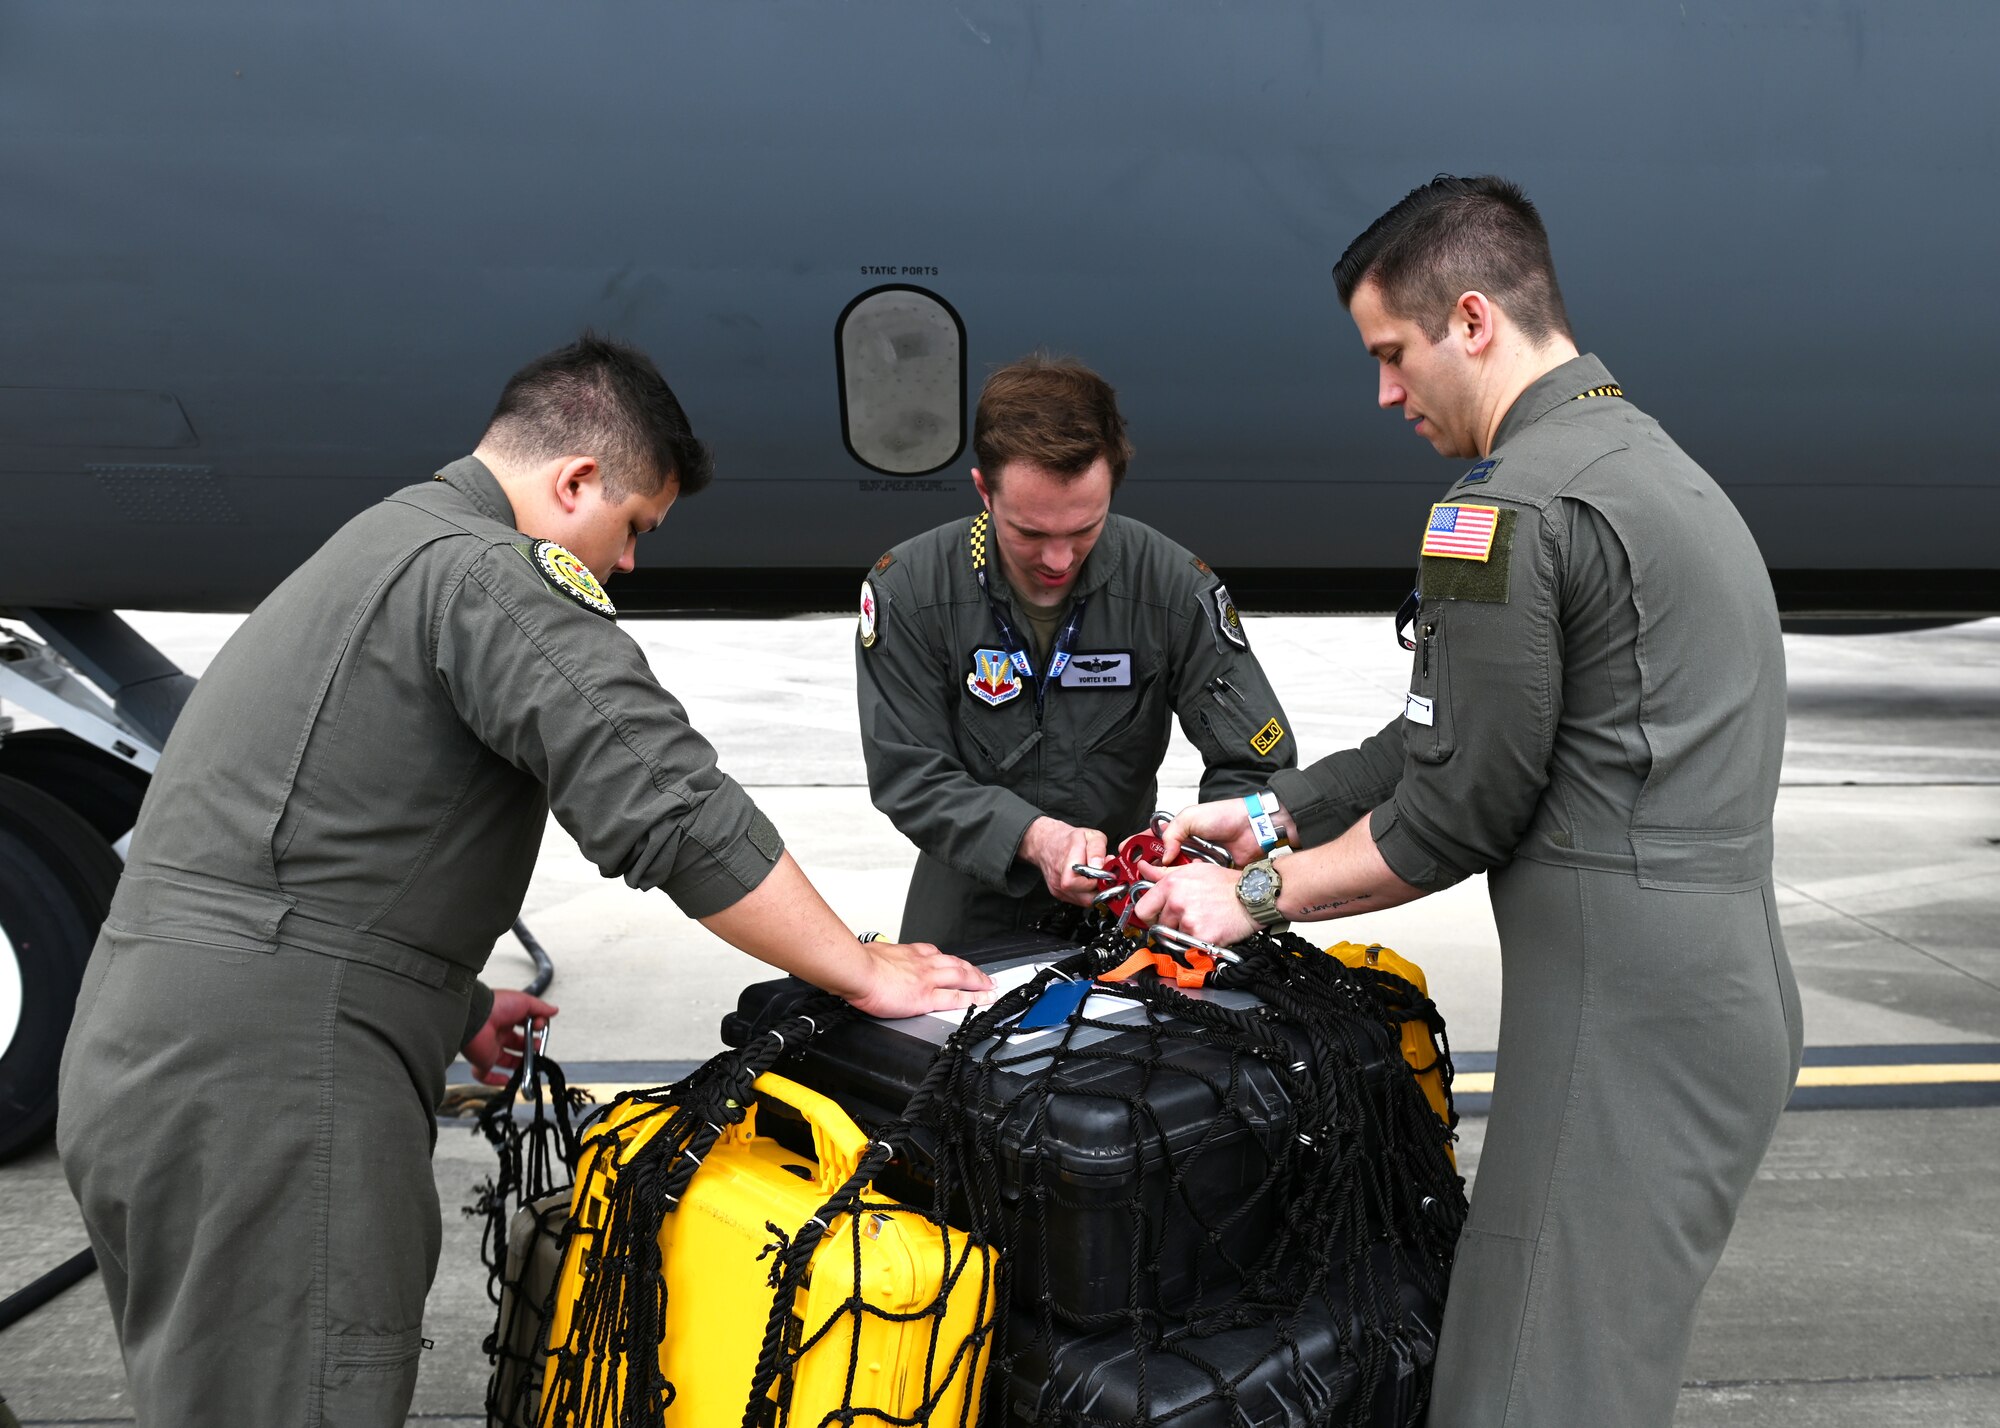 U.S. Air Force Airmen from the 509th Weapons Squadron load cargo prepare to load cargo using the Pack and Transport Reloader (PATR) crane prototype at Hurlburt Field, Florida, May 12, 2023. Initial testing for the crane took place at Fairchild AFB in April, and included the crane lifting multiple litters, a 250-pound Versatile Integrating Partner equipment Refueling (VIPER) refueling kit, and 300 pounds of aircraft equipment to include a tow bar. (U.S. Air Force photo by Staff Sgt. Lawrence Sena)